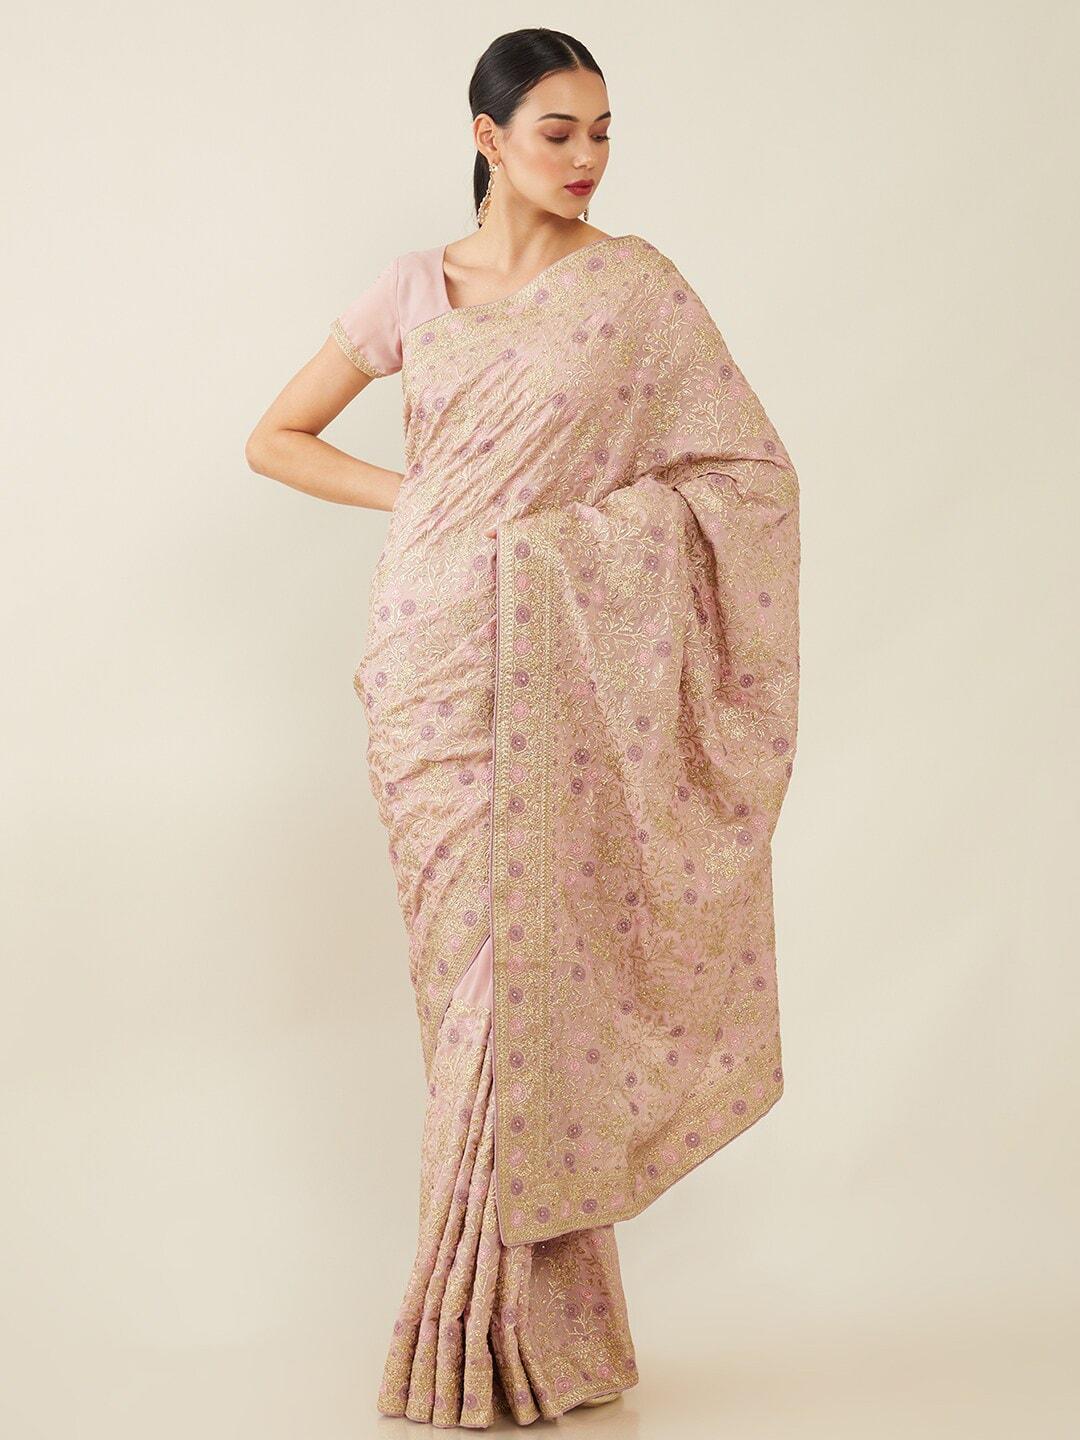 soch-purple-&-gold-toned-floral-embroidered-crepe-saree